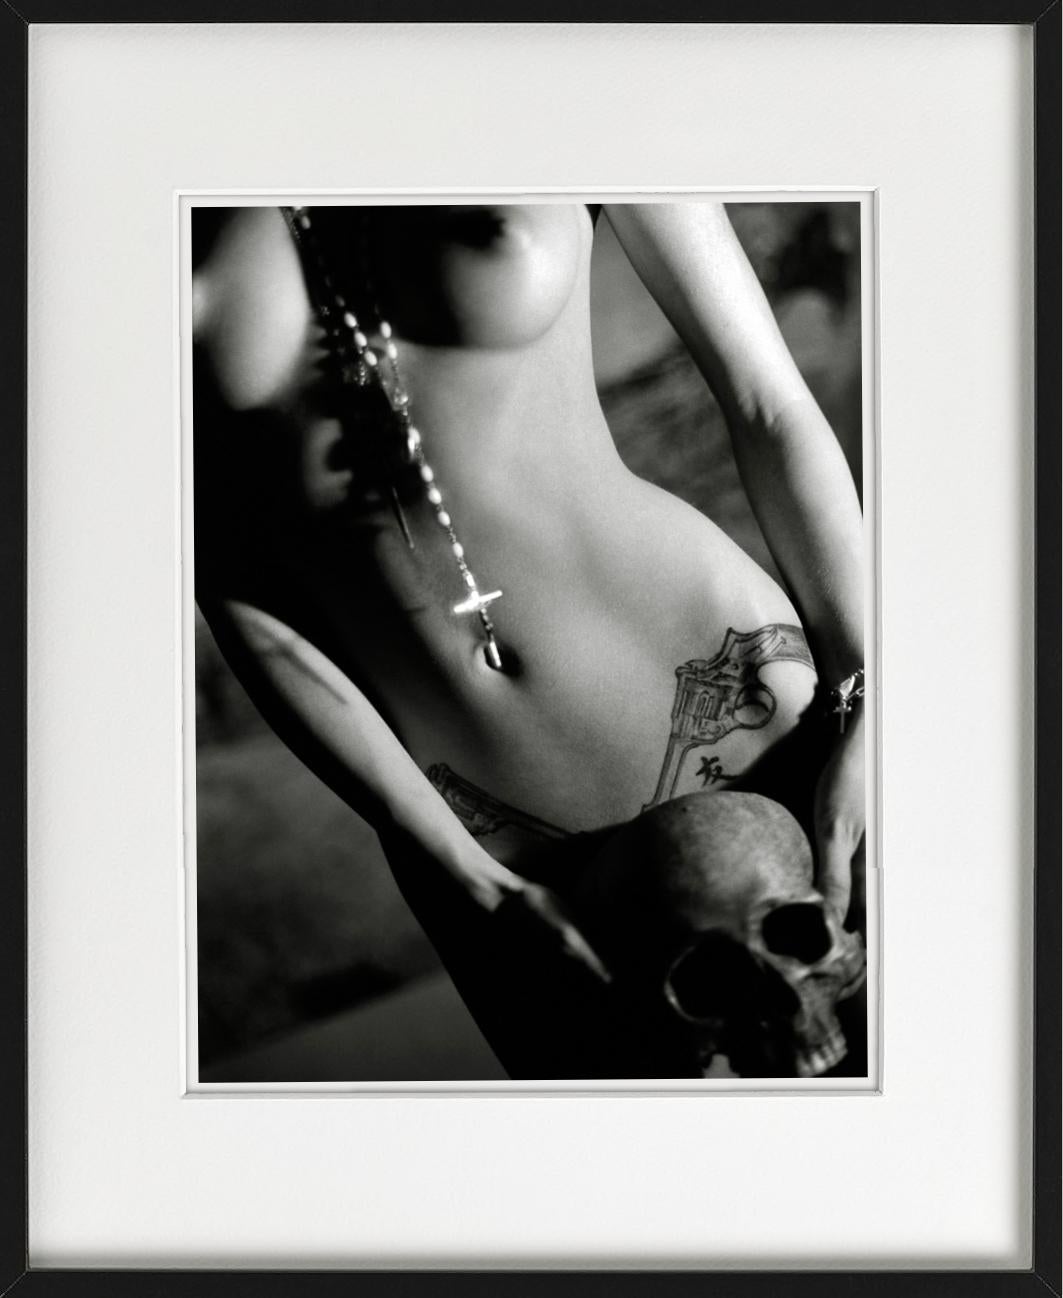 Mandy with Skull - closeup nude with skull and rosary, fine art photography 2007 For Sale 3